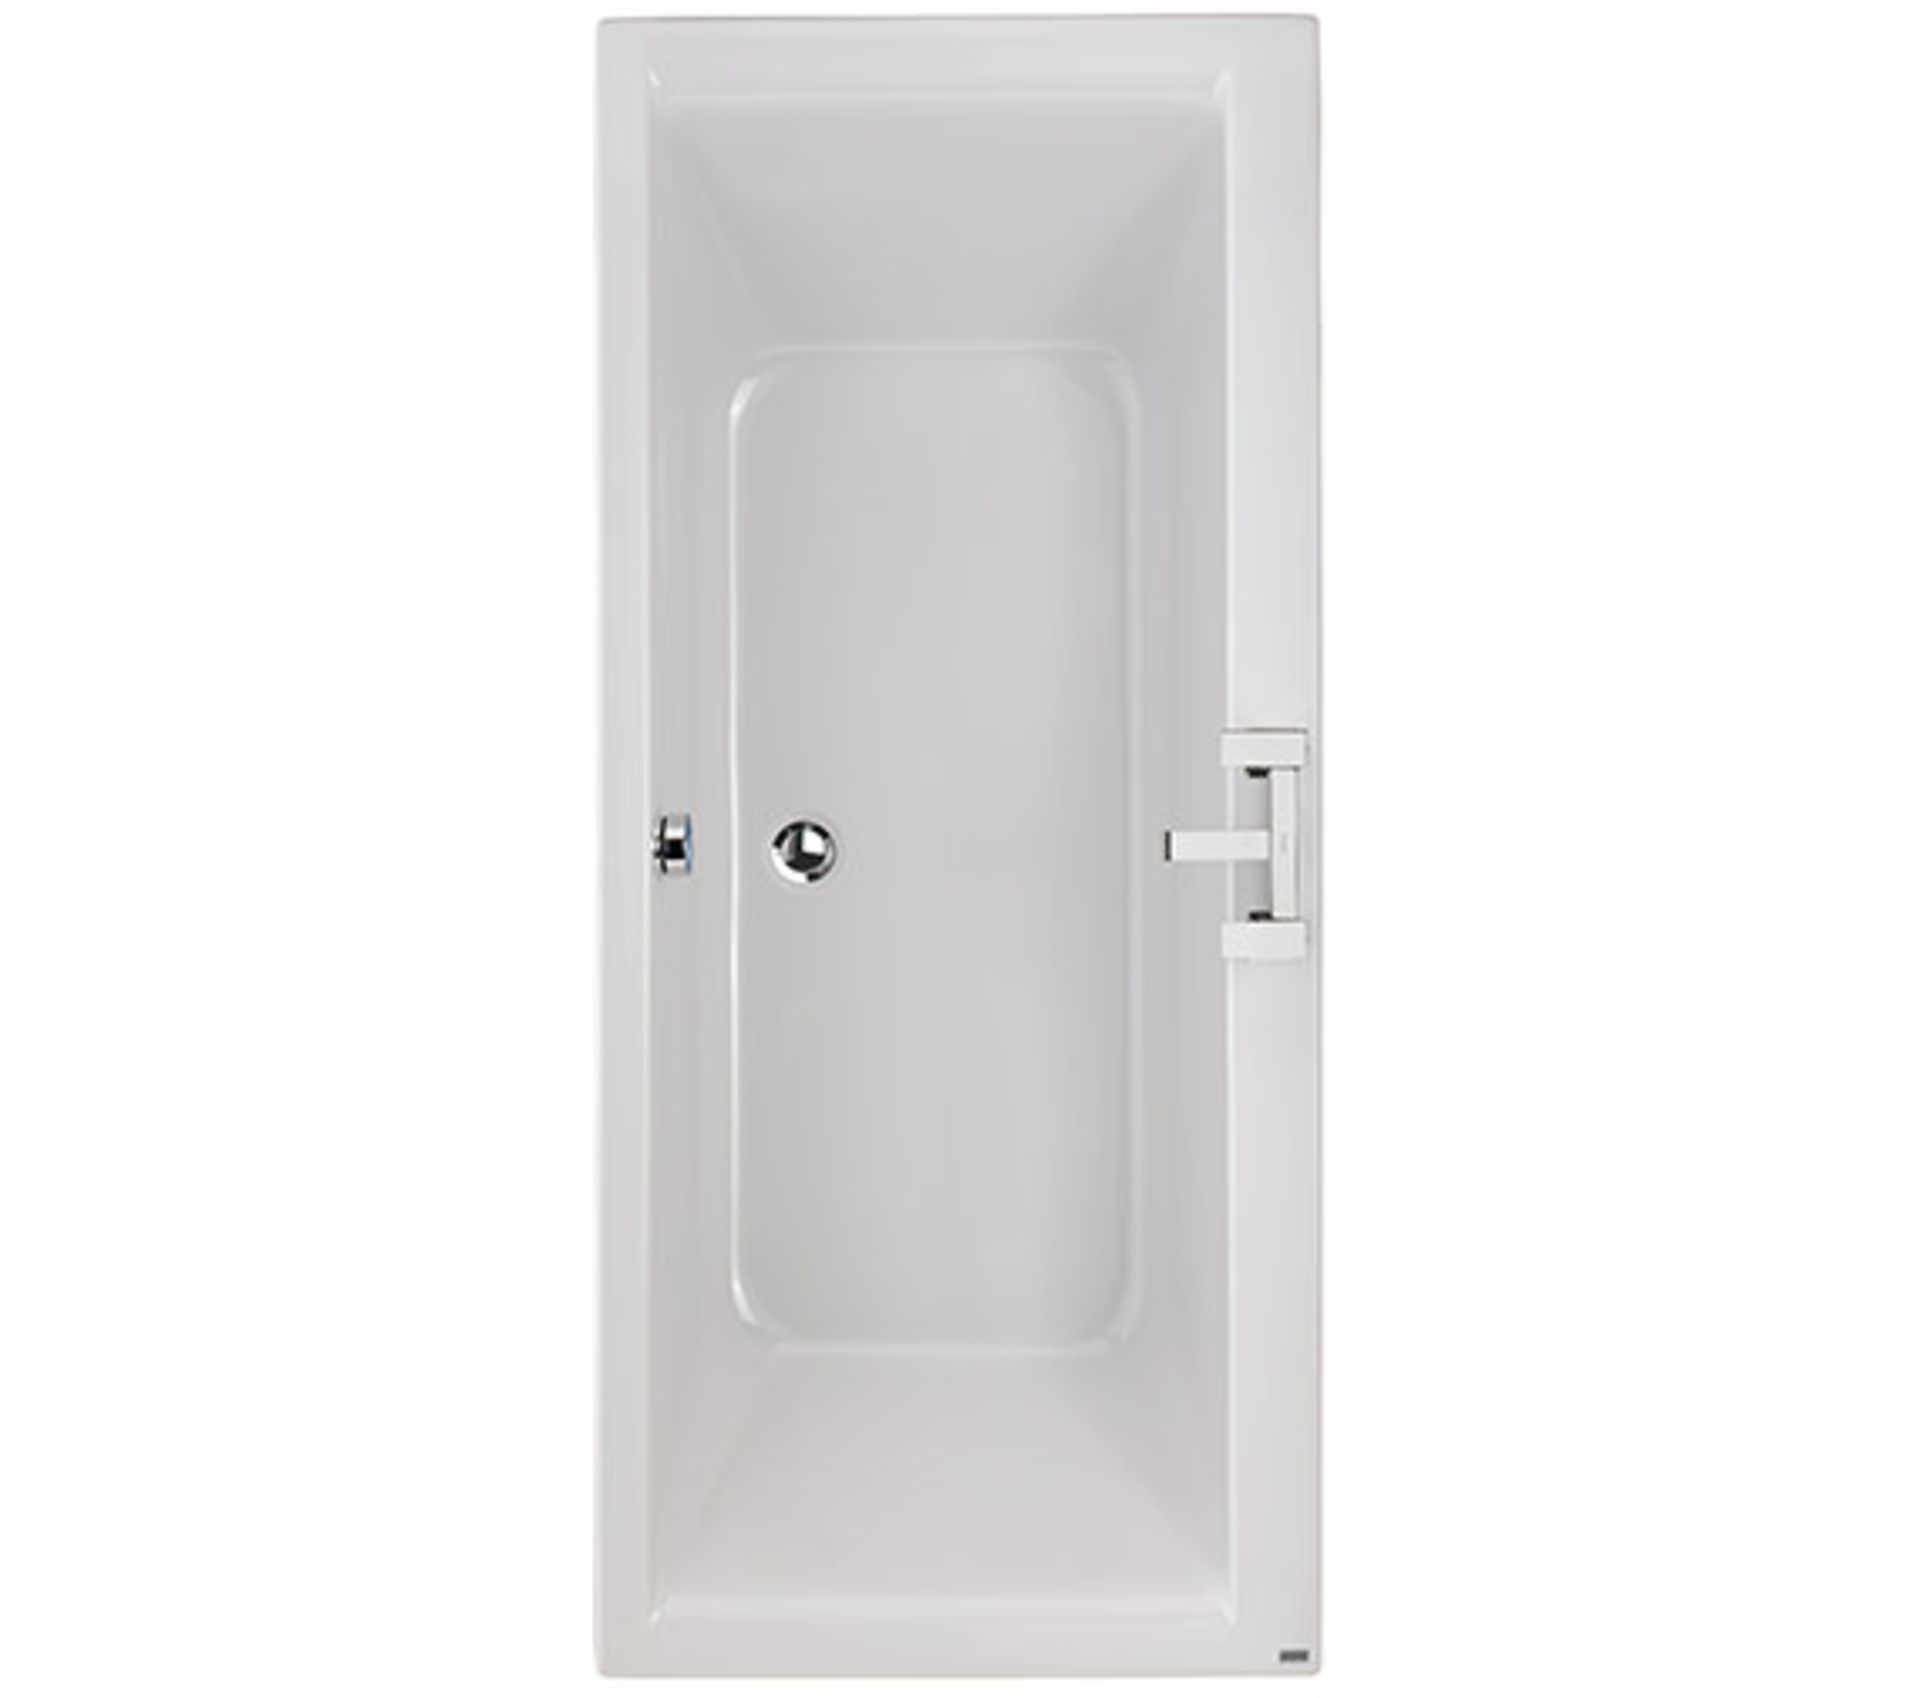 (PC12) 1700x750mm Twyfords Clarissa Plus Double Ended White Bath Tub. RRP £442.99. The Twyford...( - Image 2 of 4